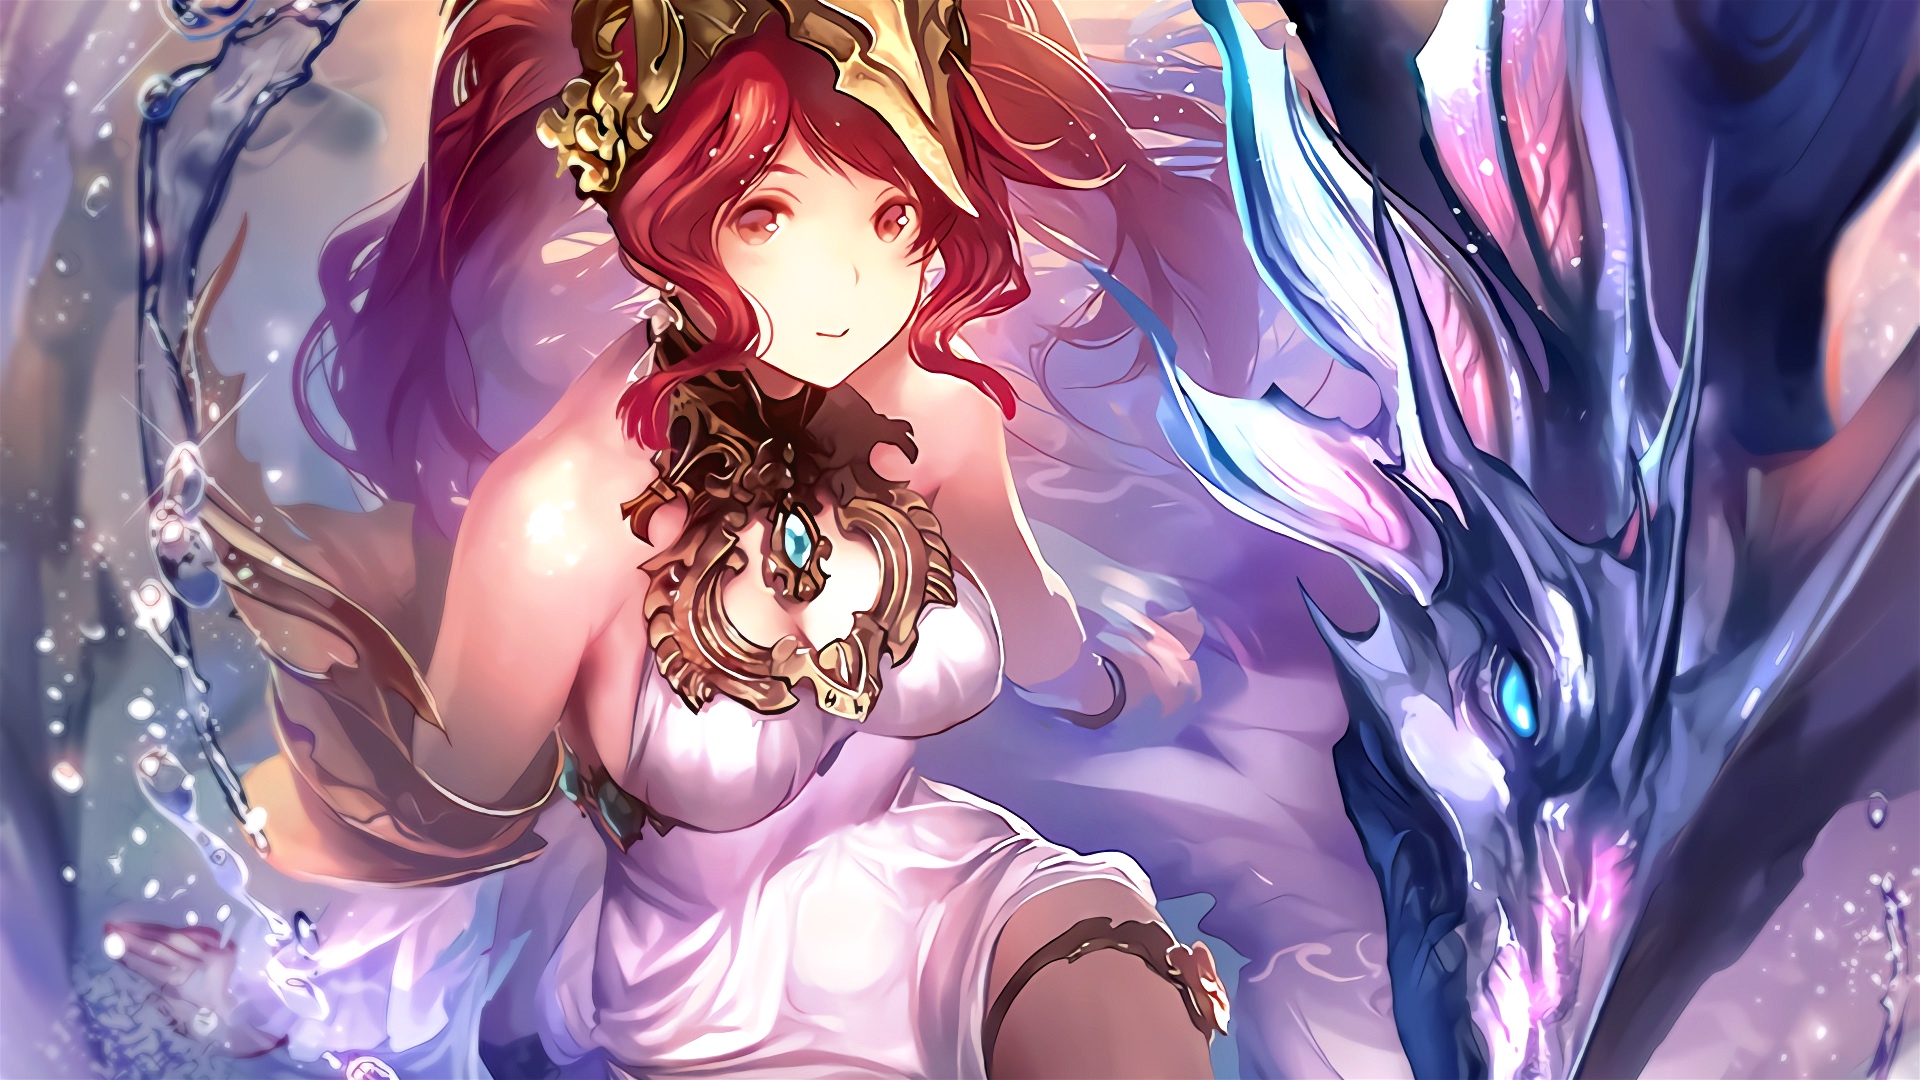 Desktop Wallpaper Sibyl Shadowverse Video Game Red Head Hd Image Picture Background Bf69df